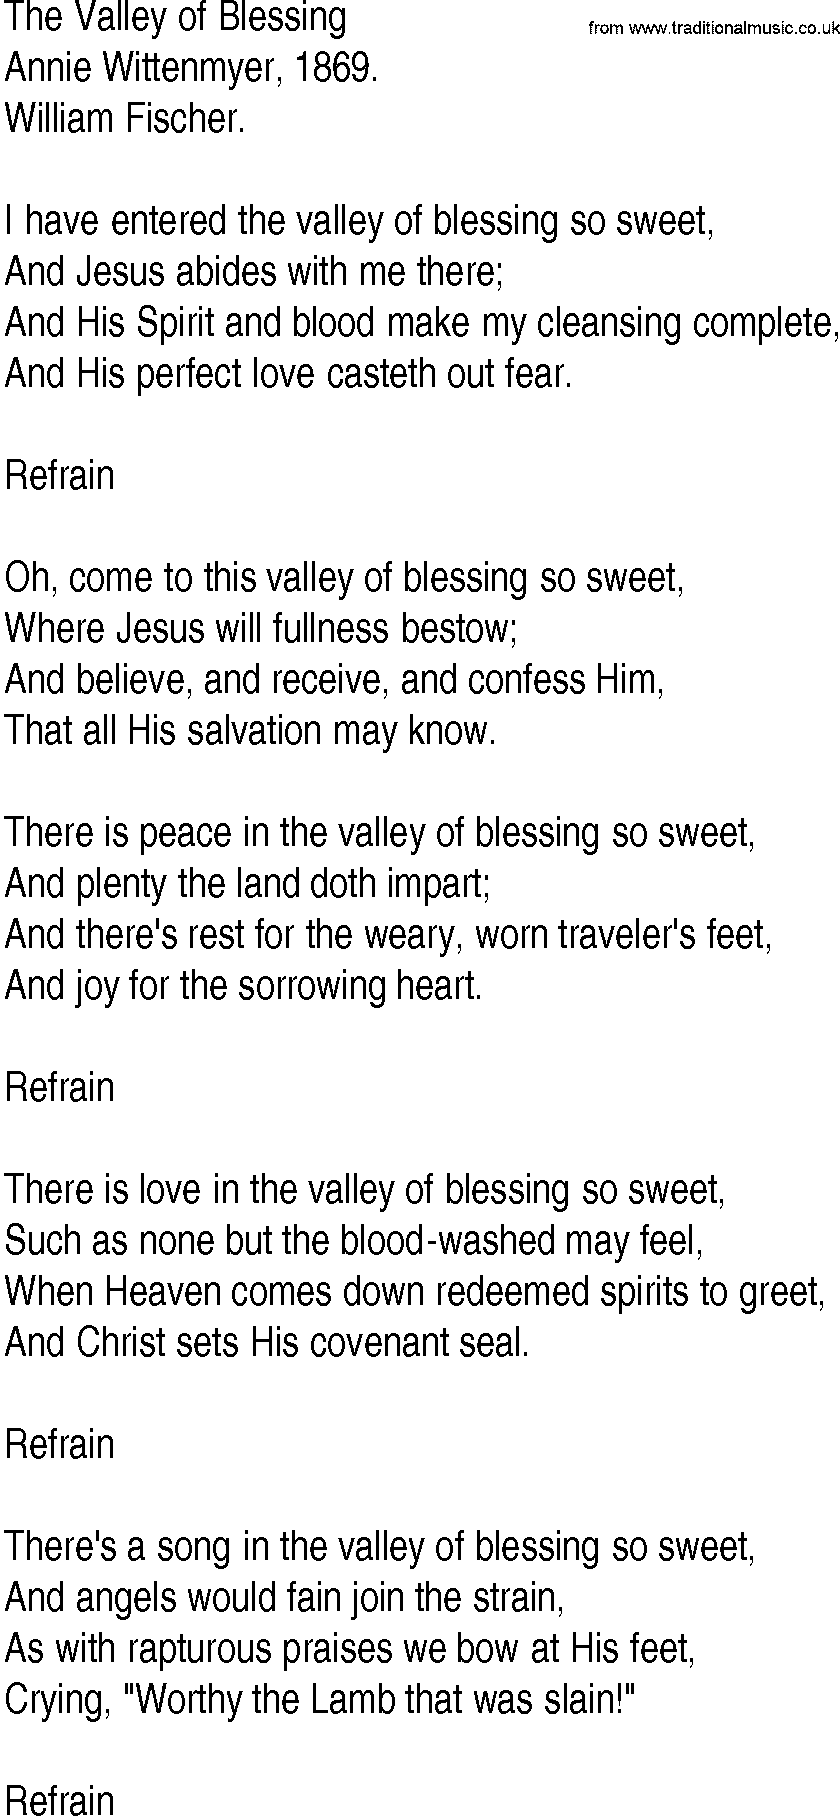 Hymn and Gospel Song: The Valley of Blessing by Annie Wittenmyer lyrics